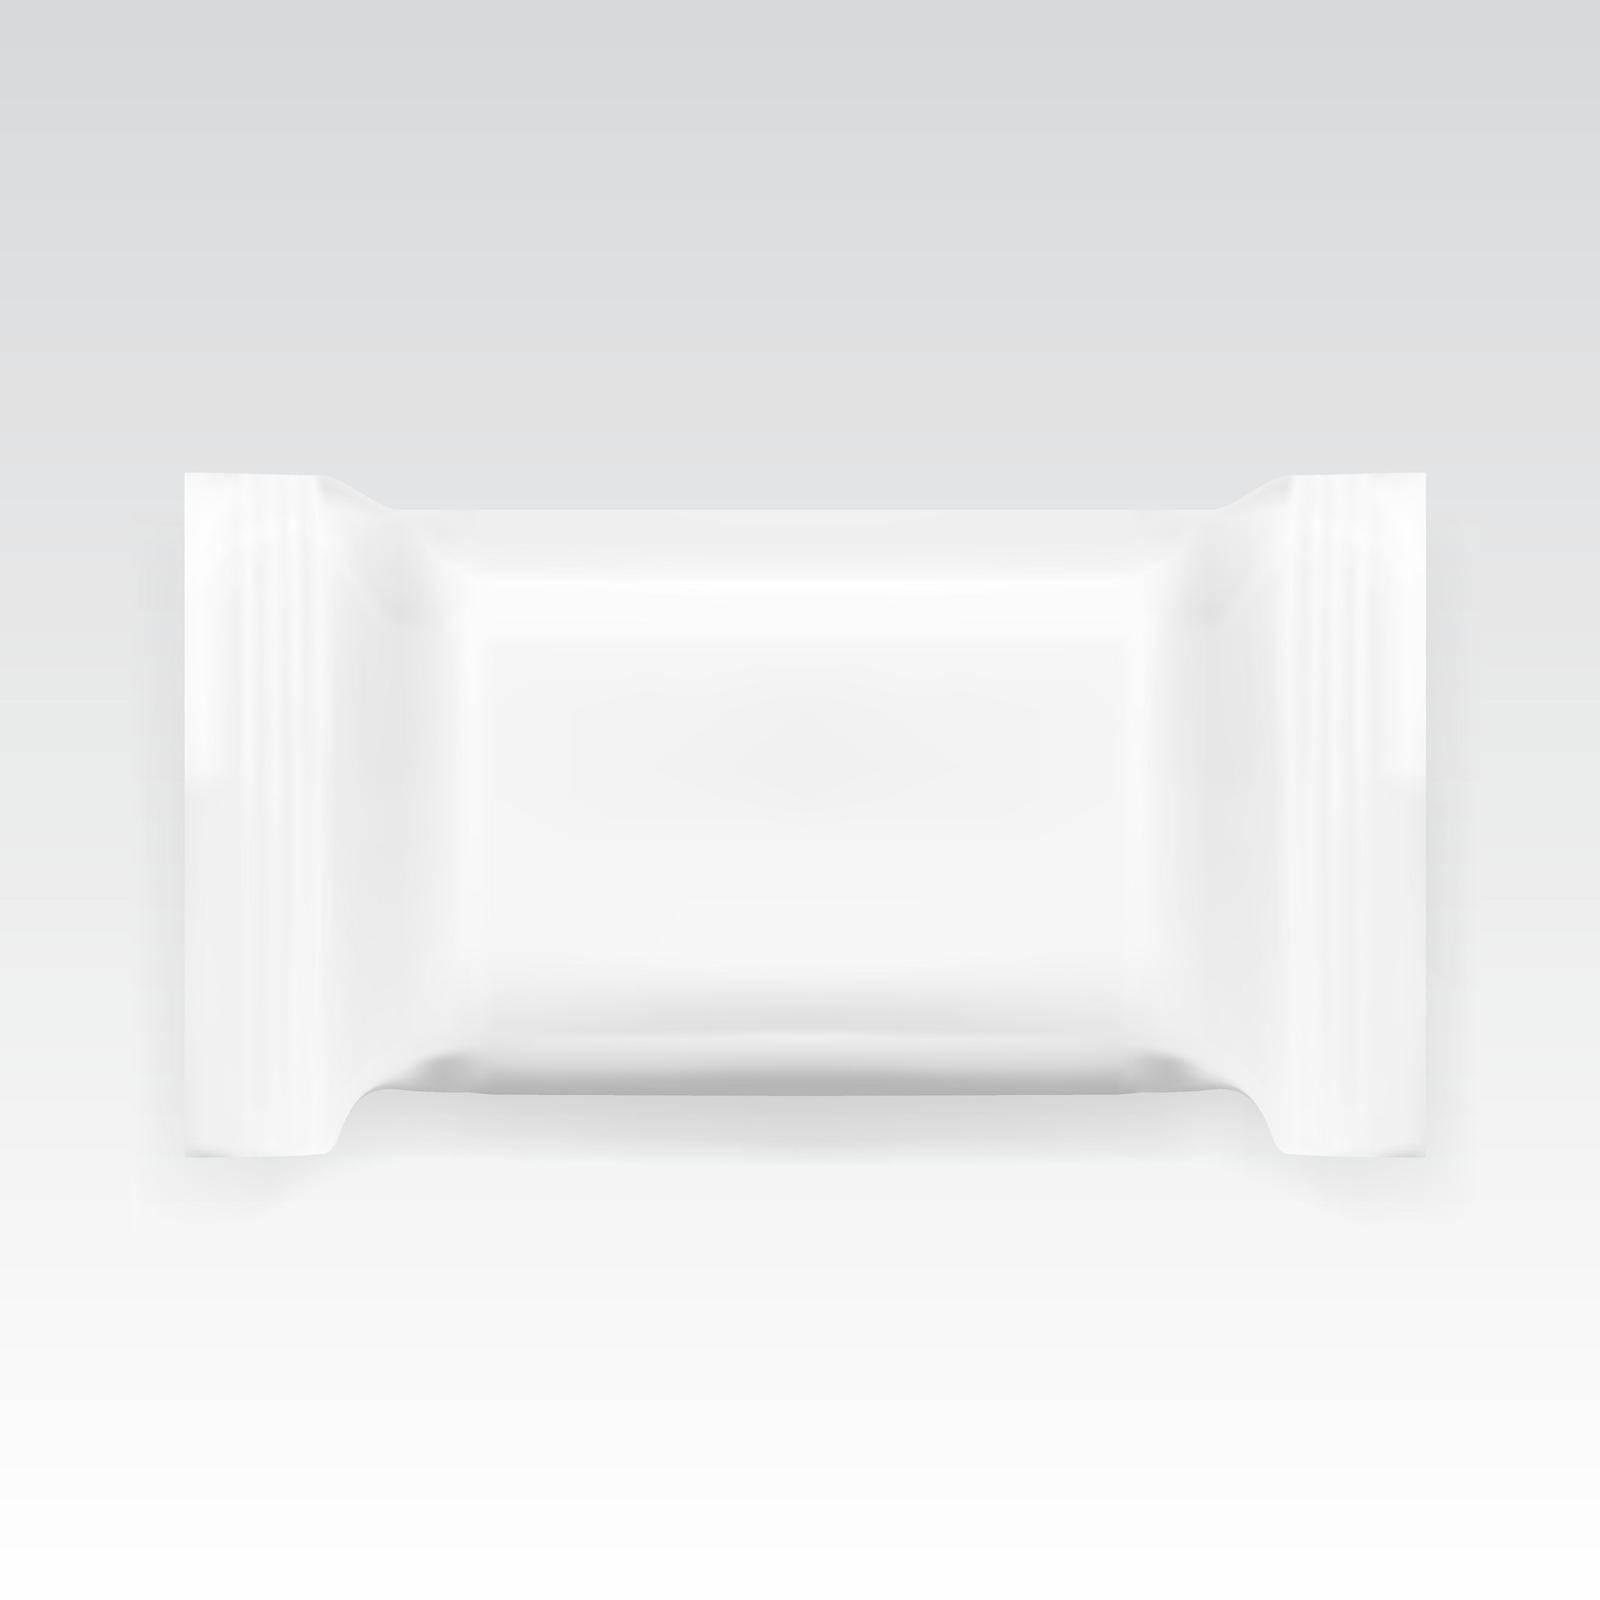 Realistic Packed White Disposable Soap. EPS10 Vector